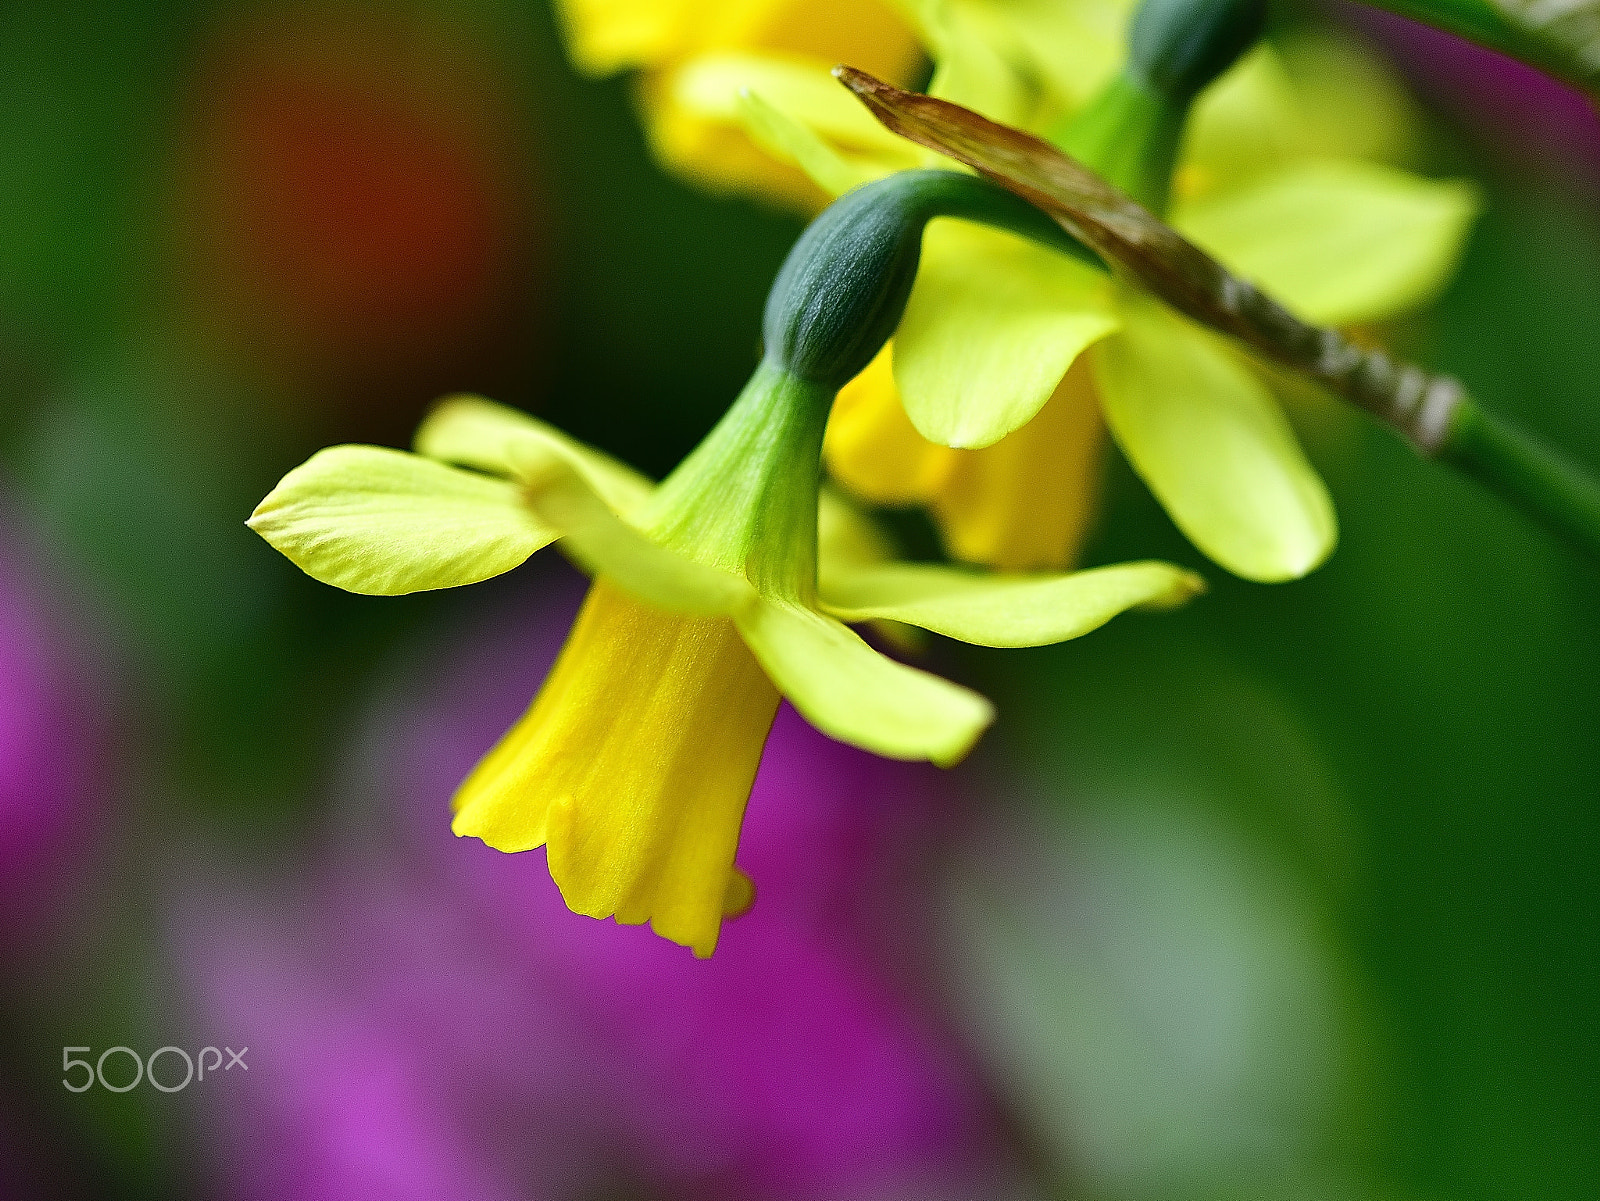 Nikon D800E sample photo. Flowers telling spring are in green photography